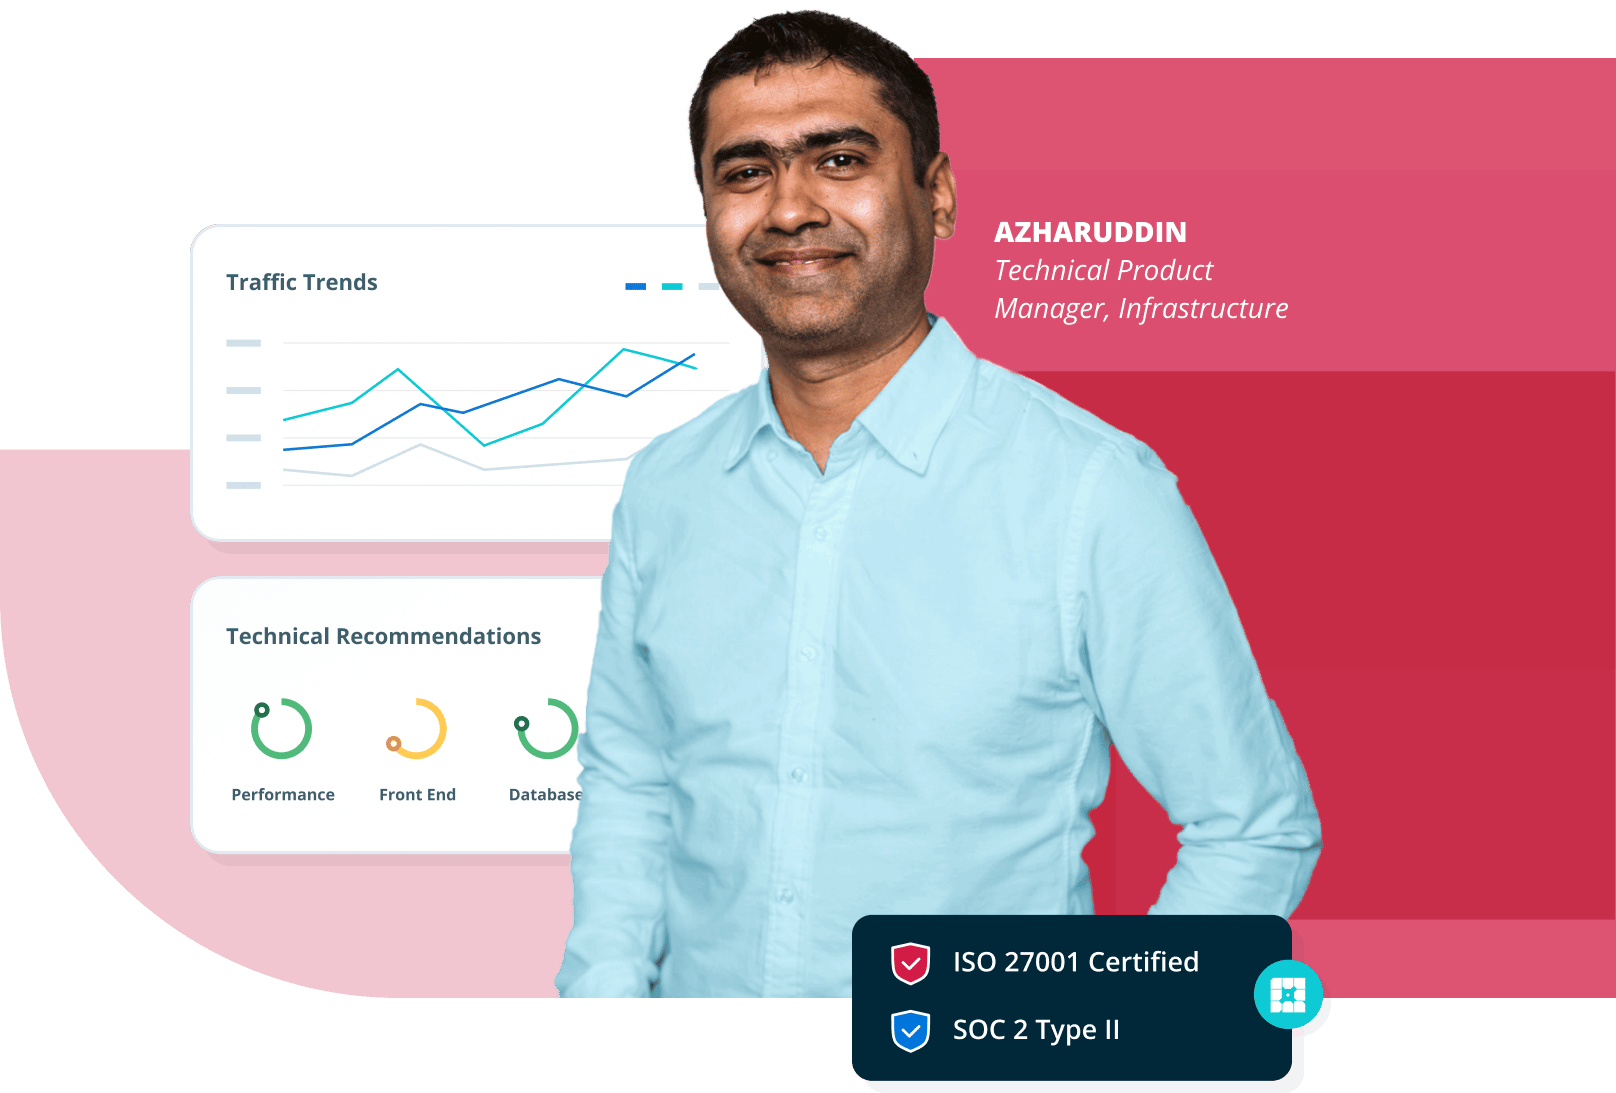 Sustain top-tier performance as you scale and grow your business with WP Engine's Enterprise platform maintained by our Technical Product Managers like Azharuddin.